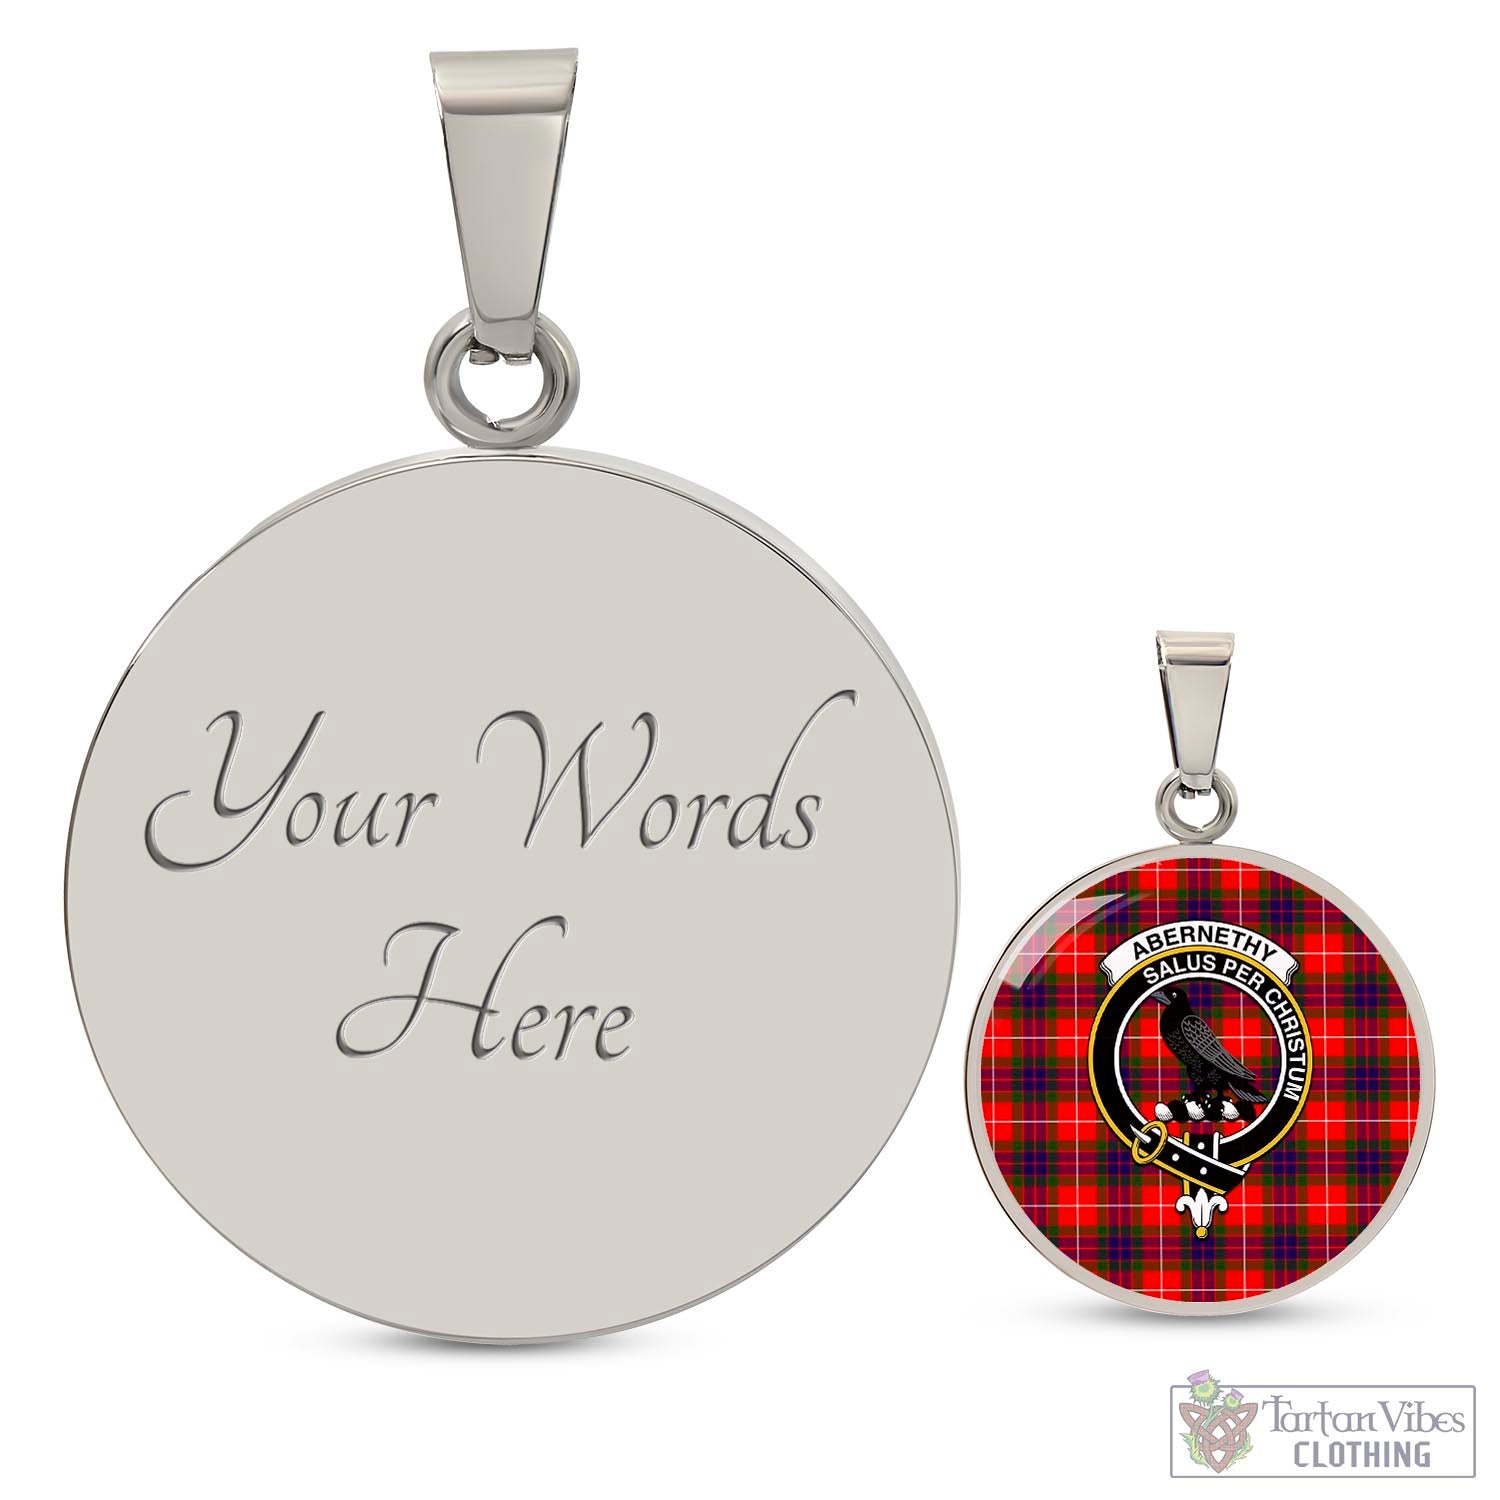 Tartan Vibes Clothing Abernethy Tartan Circle Necklace with Family Crest